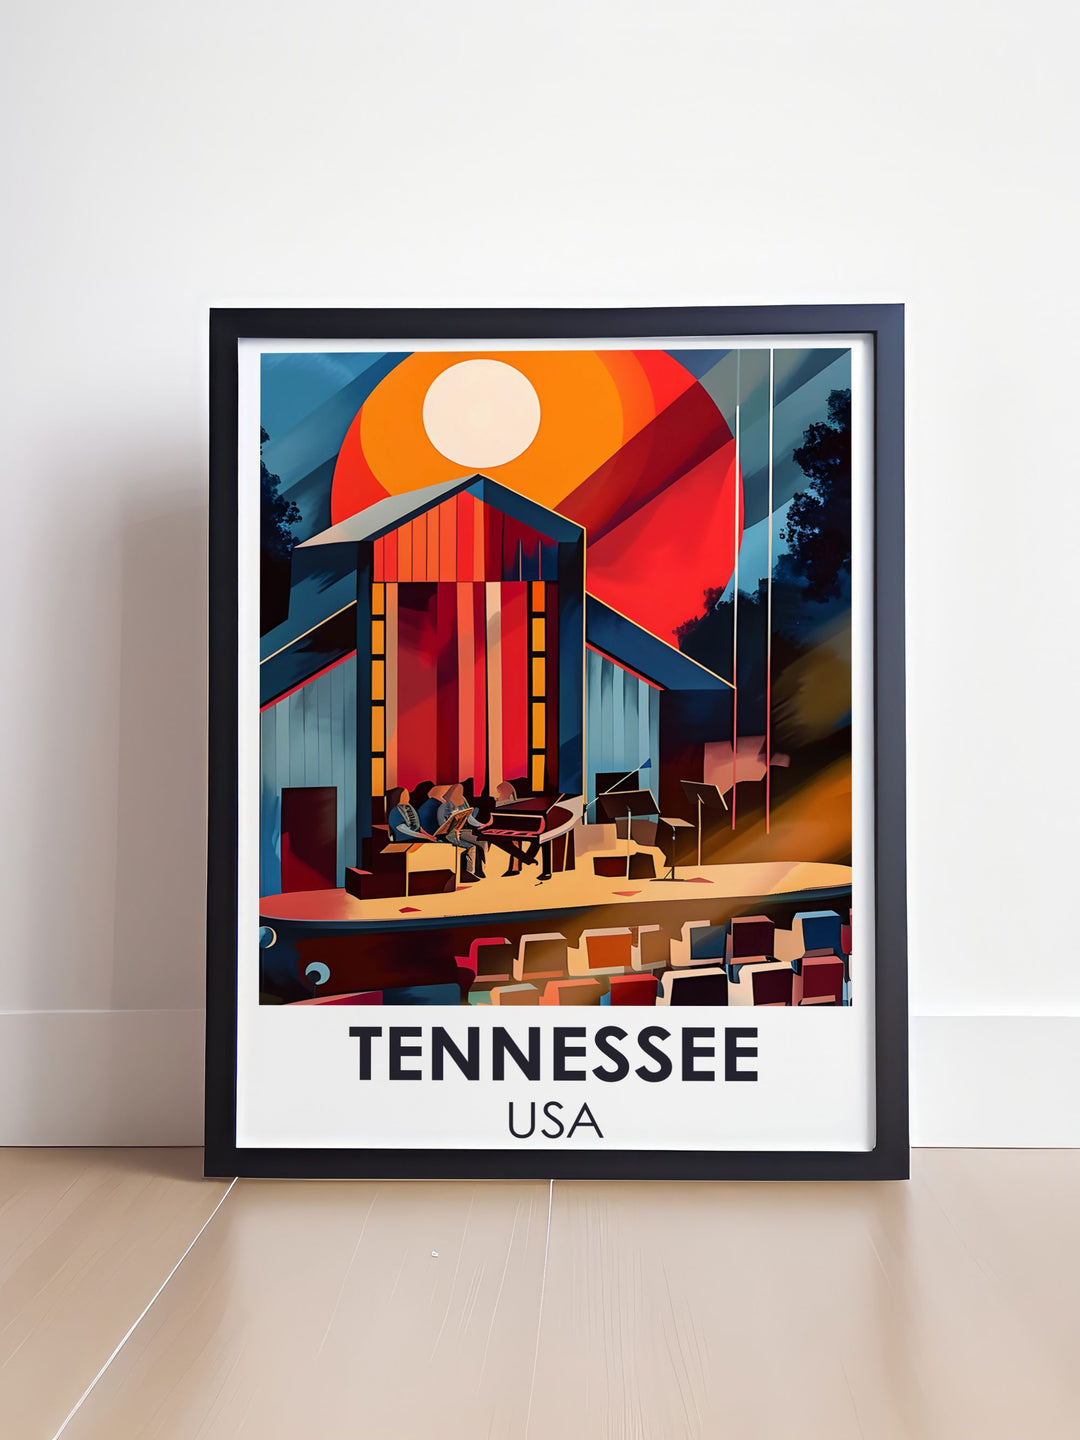 USA Travel Poster showcasing the historic Ryman Auditorium in Nashville Tennessee and The Grand Ole Opry. This piece of art is a great addition to any travel collection and makes a unique gift for music lovers.